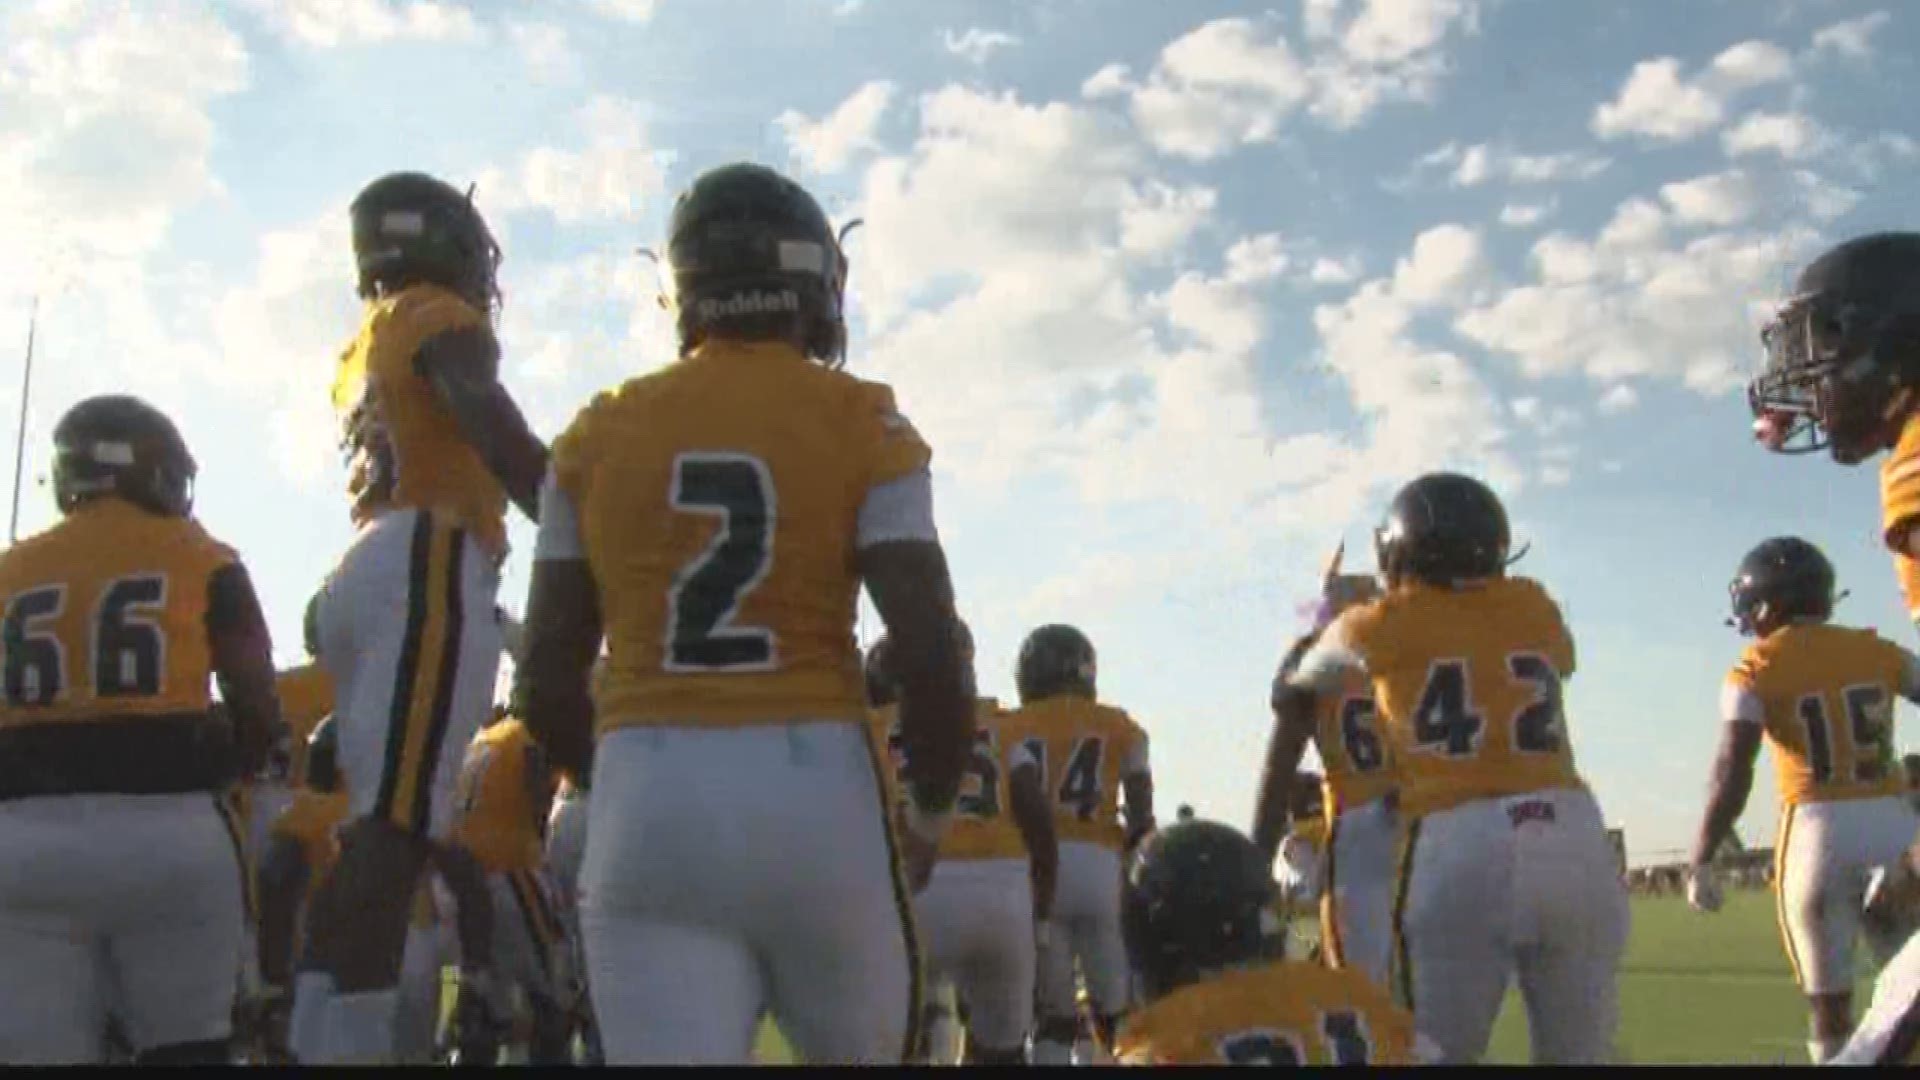 Three years ago, Peach County football suffered the loss of one of their teammates in a fatal car accident. Even as the Trojan community grieved the passing of Raekwon Smith, death and defeat continued to test the Peach family. Marvin James shares the story of how Trojan Nation is overcoming those challenges together.